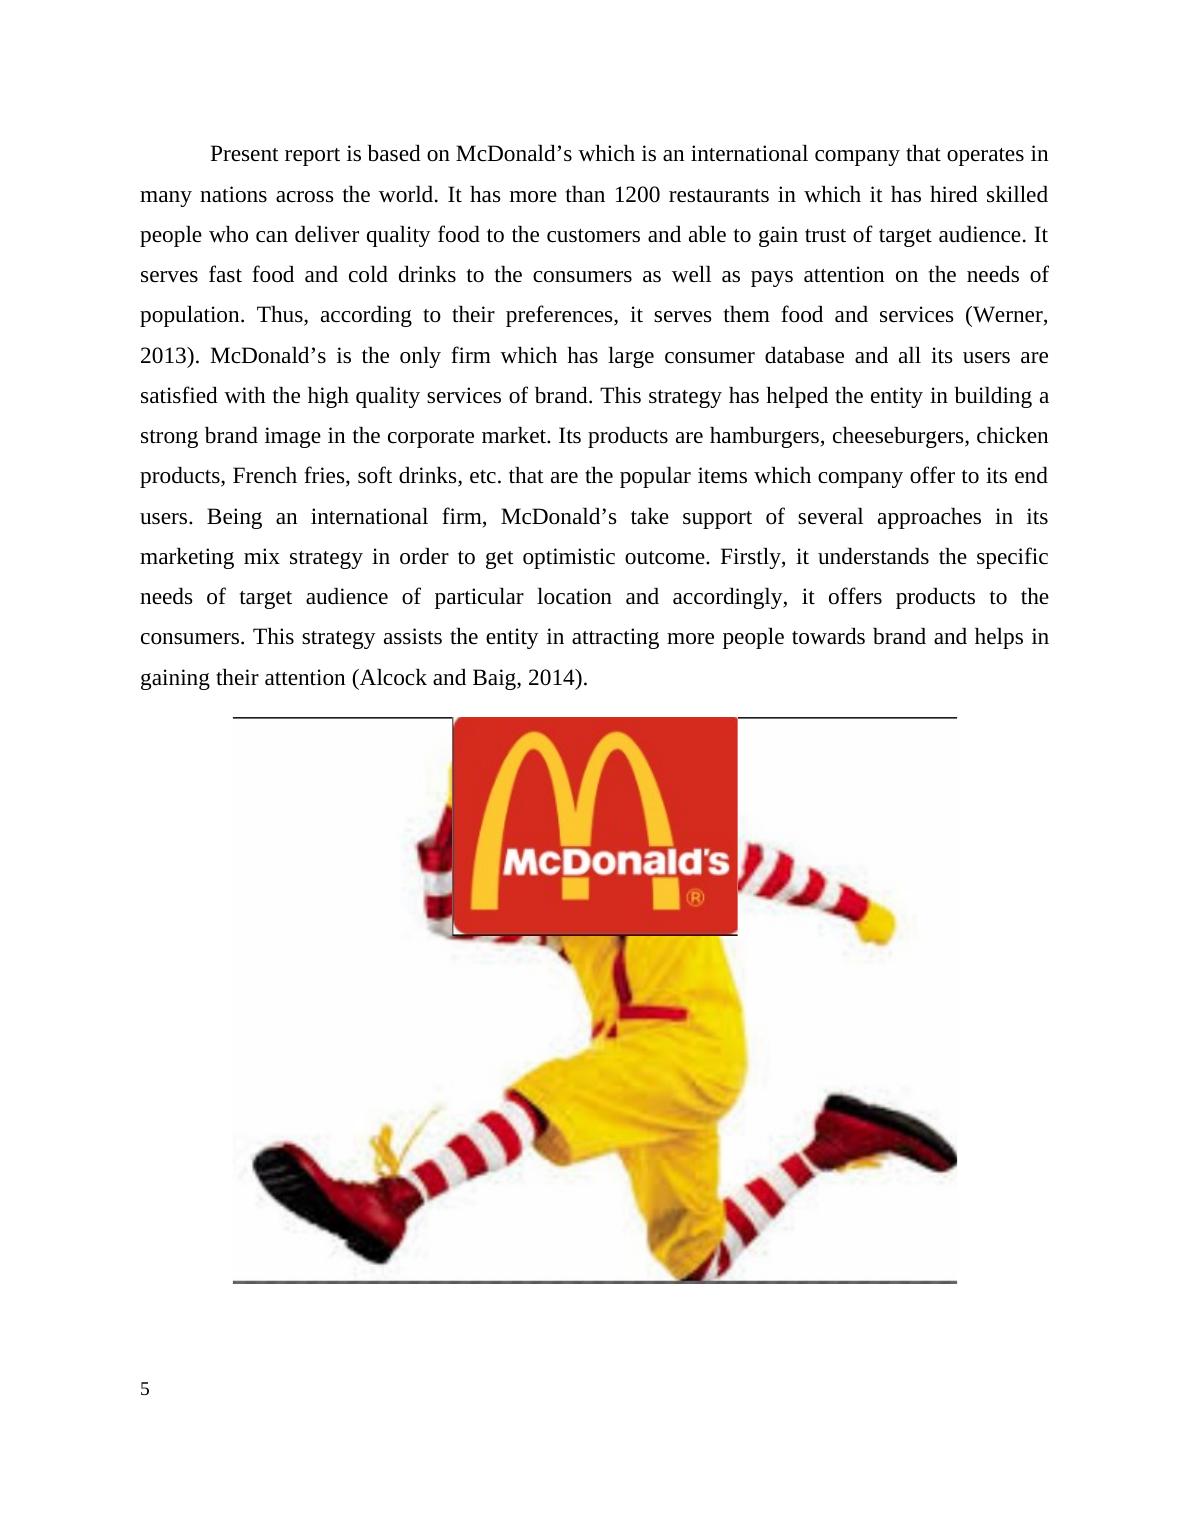 Organizational Strategy and Structure of Mcdonalds_5